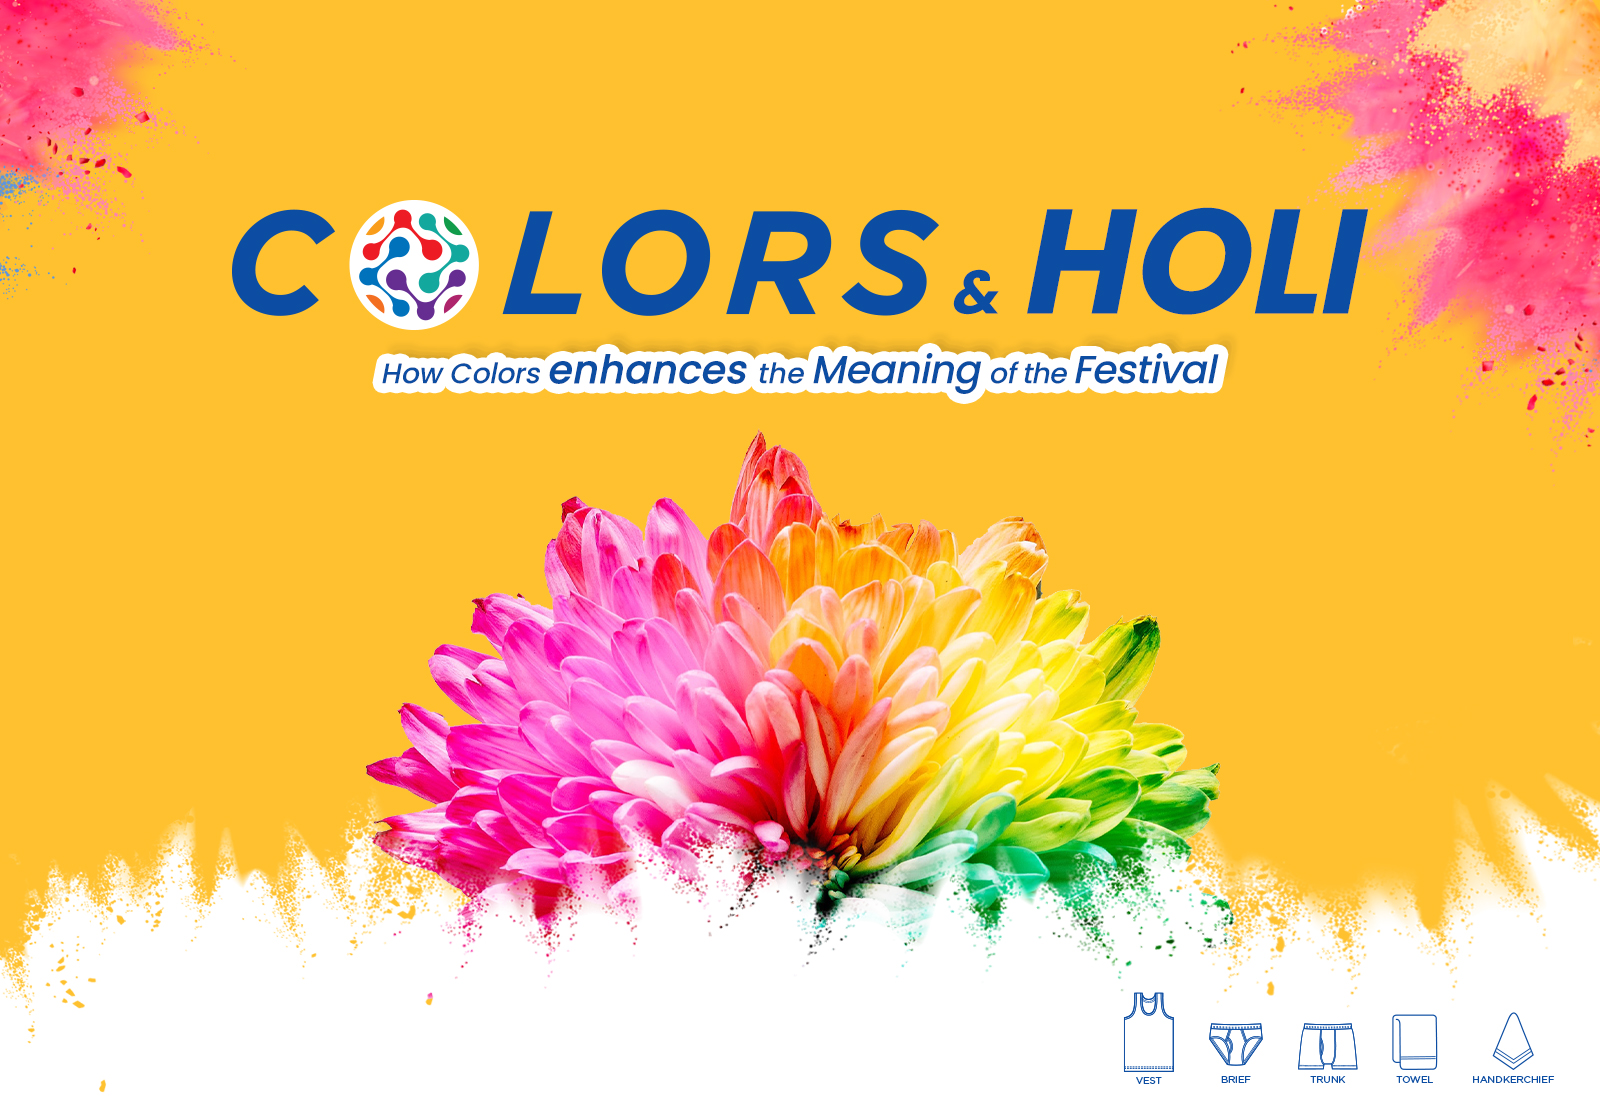 Colors and Holi: How Colors enhances the Meaning of the Festival